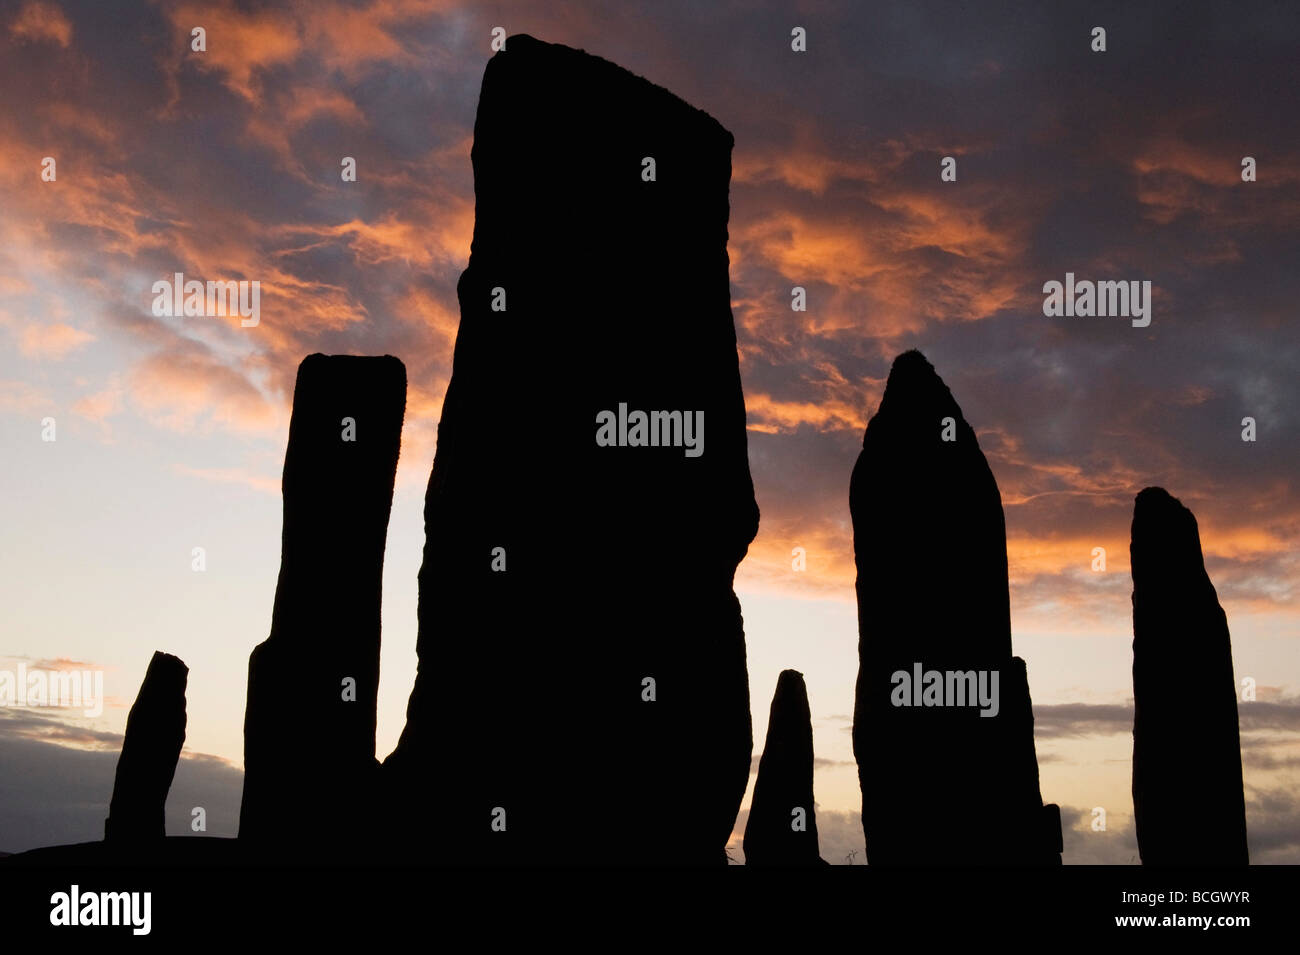 Callanish Stone Circle, Neolithic Standing Stones, Sunset on Summer Solstice, Isle of Lewis, Outer Hebrides, Scotland Stock Photo